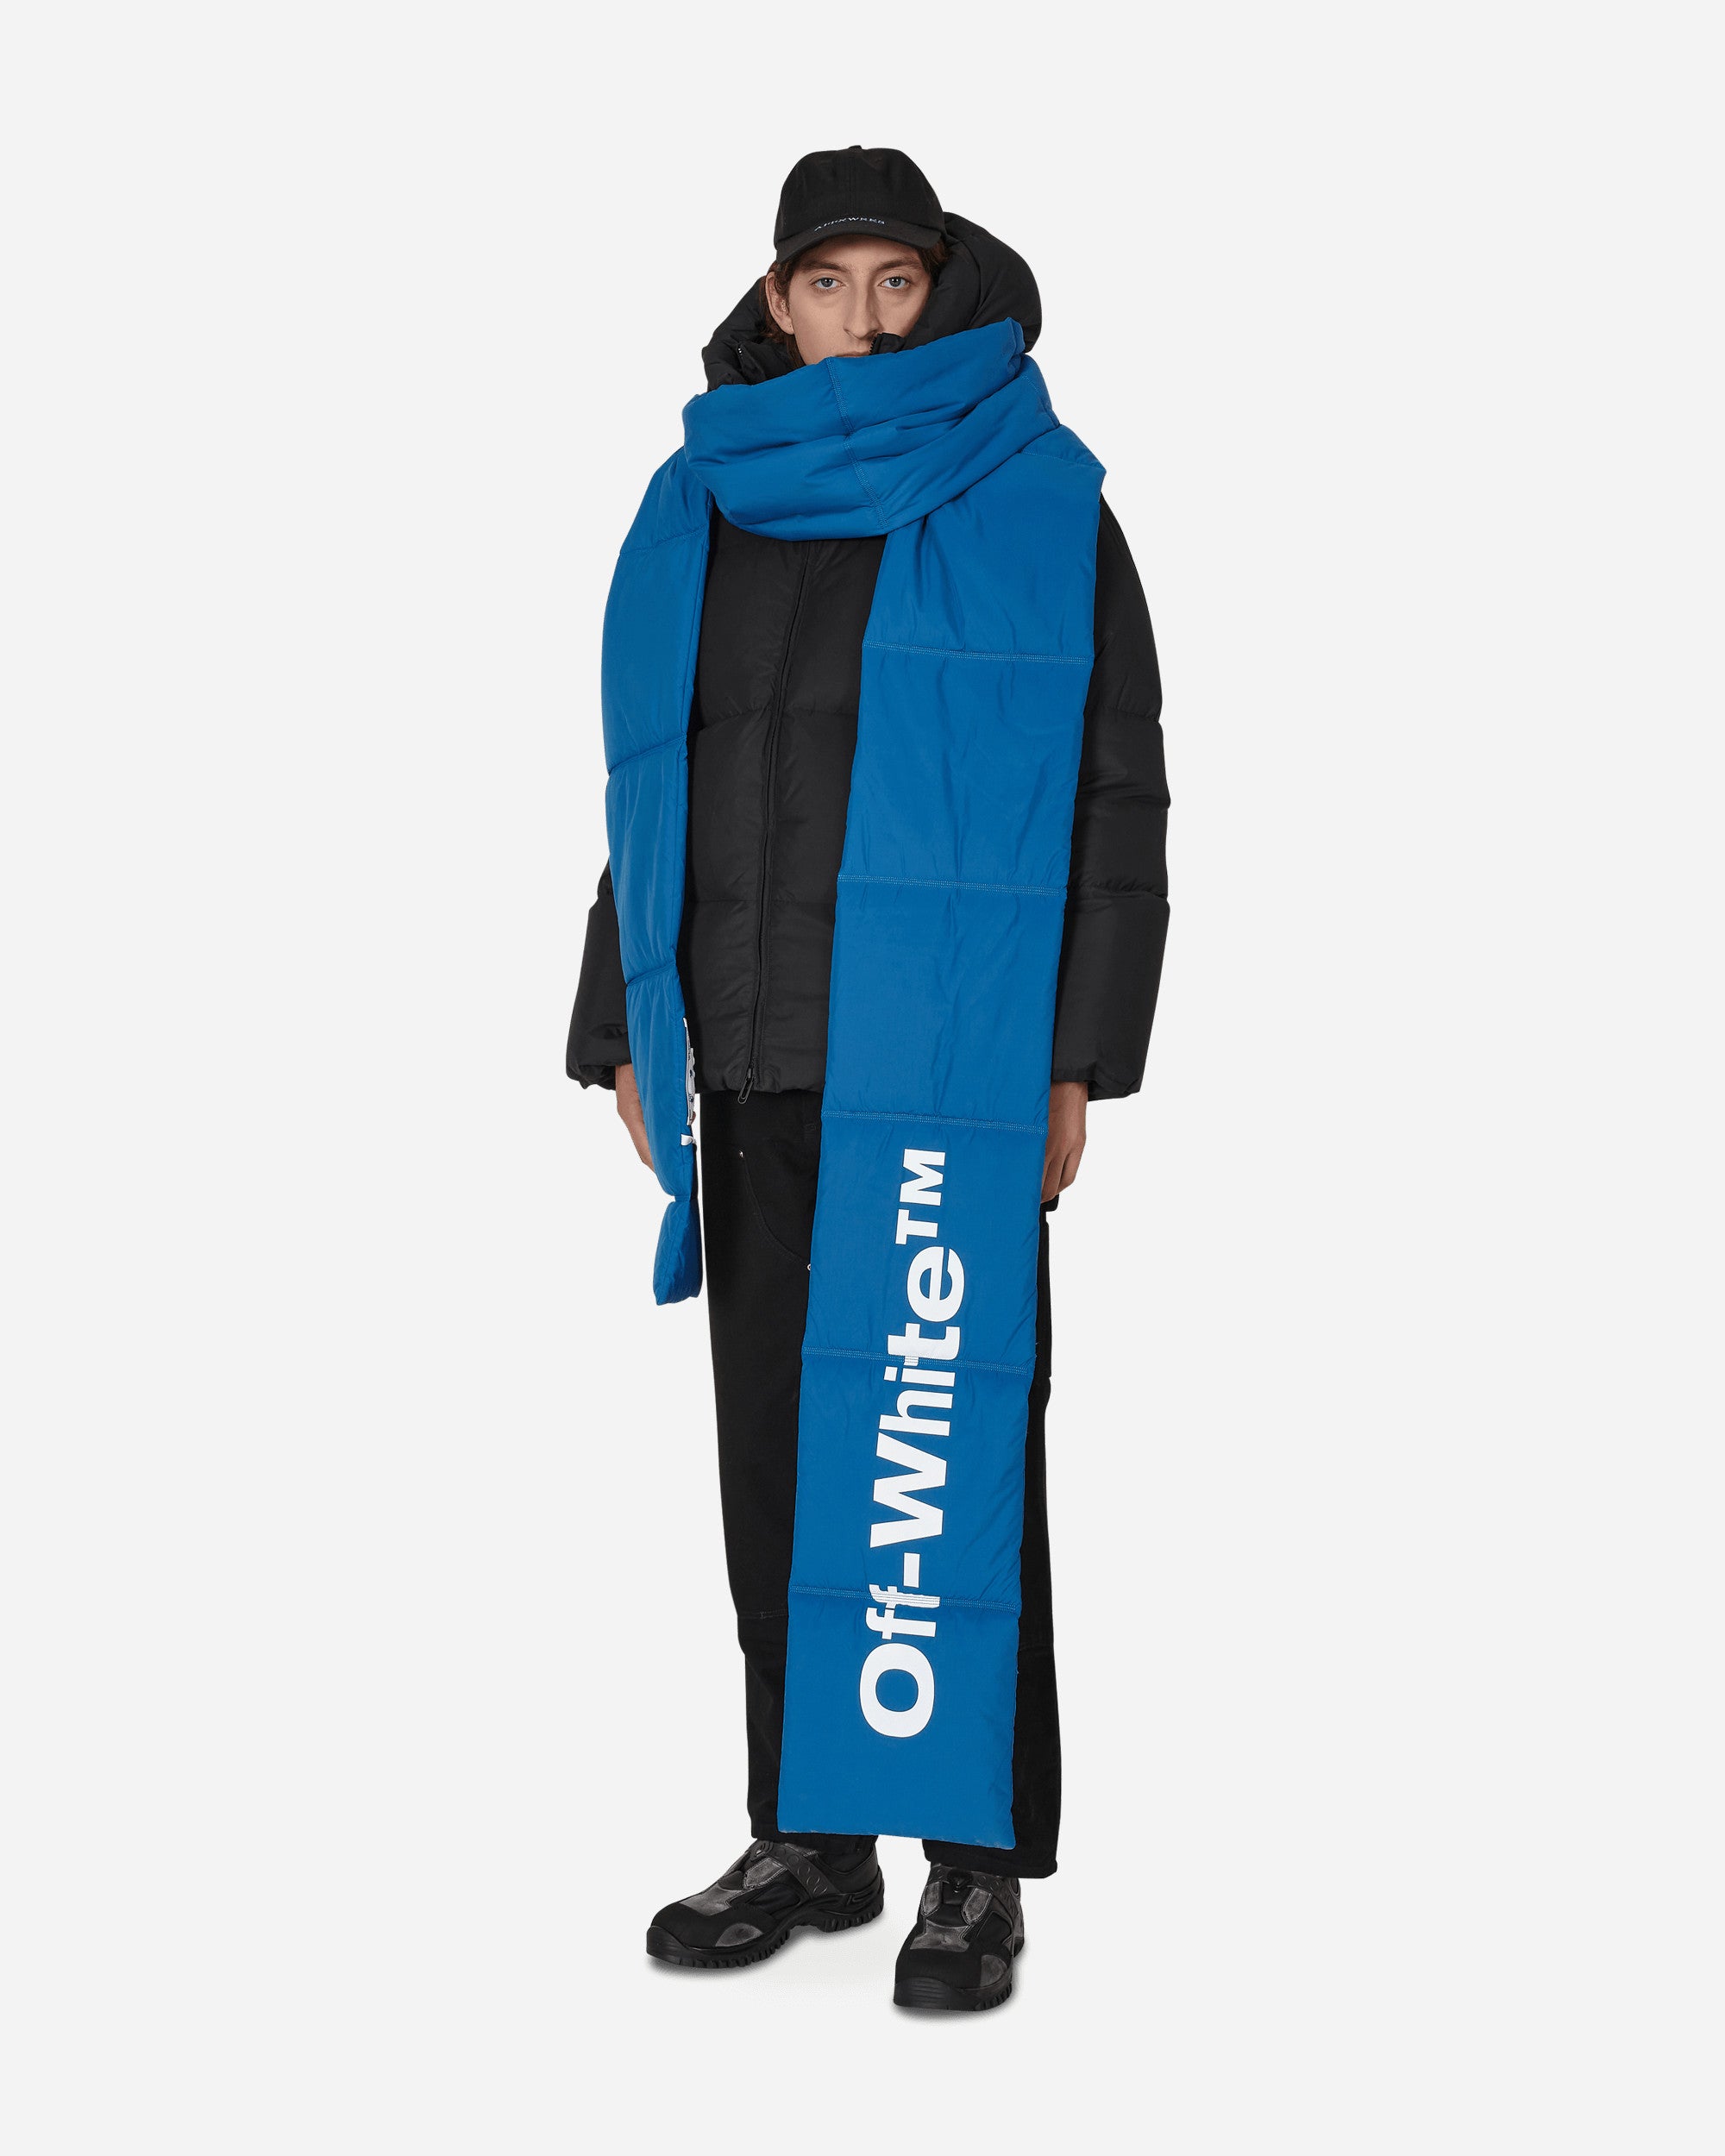 Off-White Bounce Maxi Ski Scarf Peacock Black Gloves and Scarves Scarves and Warmneck OMMA030F22KNI001 4510